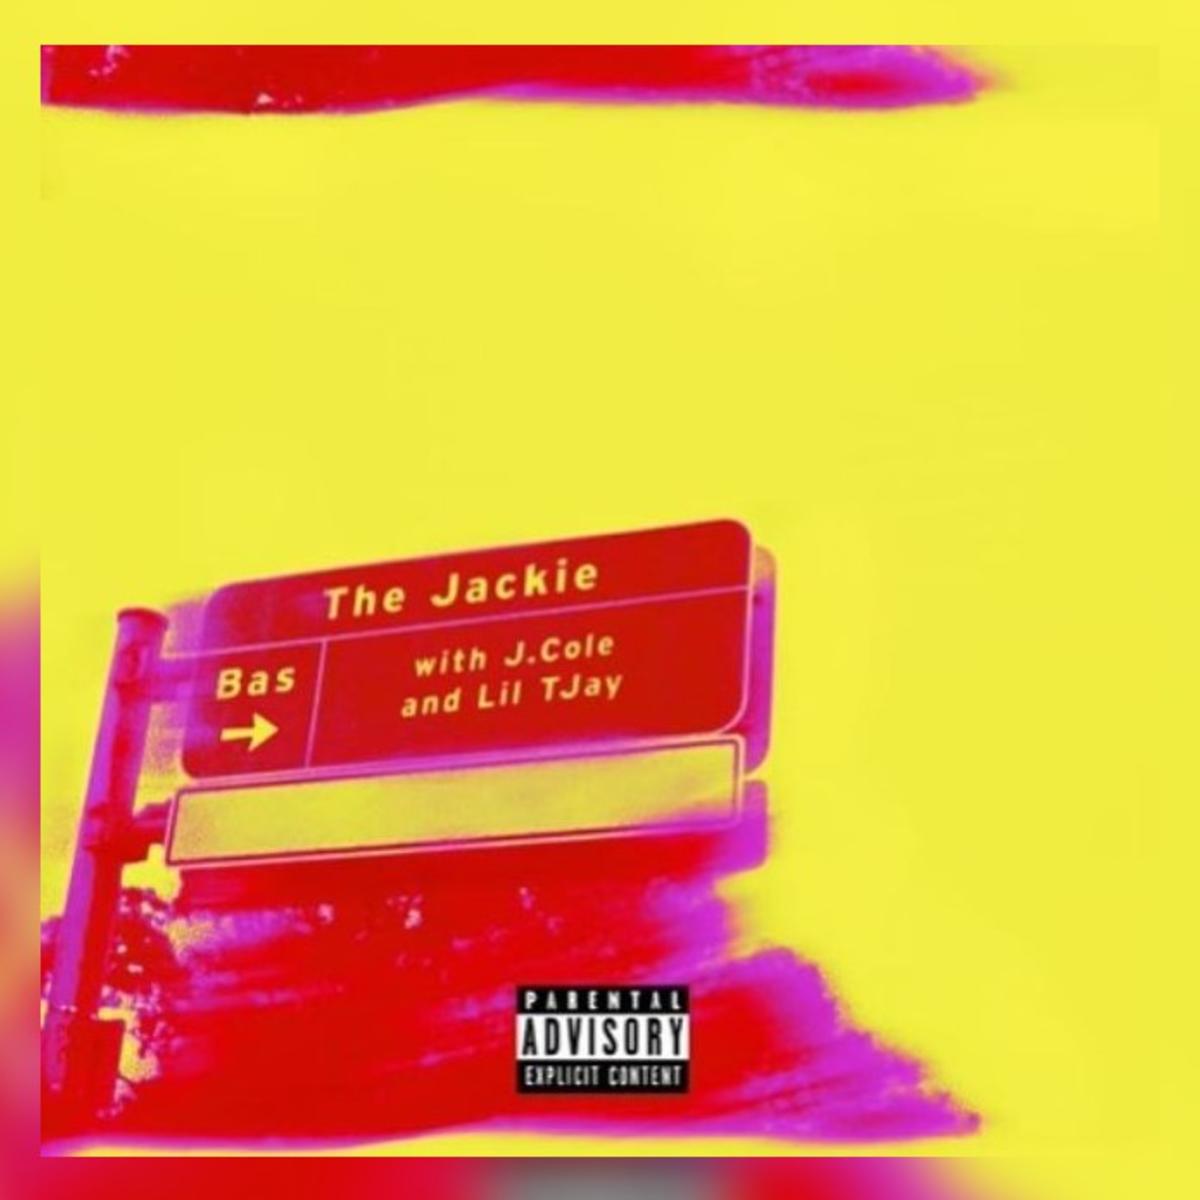 Bas Calls On J. Cole & Lil TJay For “The Jackie”